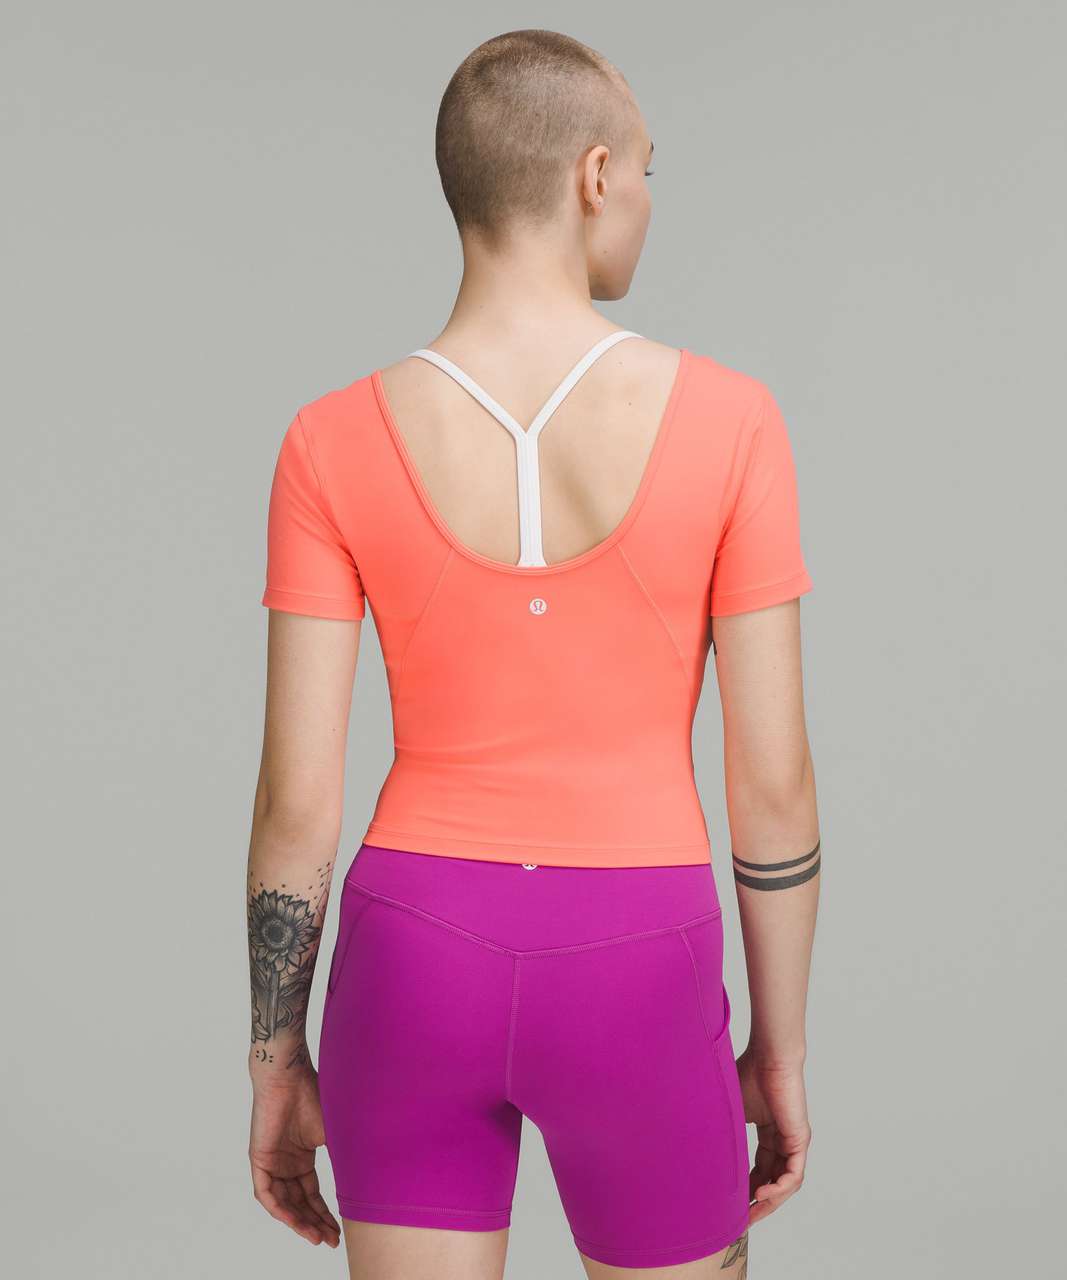 Lululemon Align Tank Raspberry Cream Pink Size 8 - $30 (48% Off Retail) -  From Emily